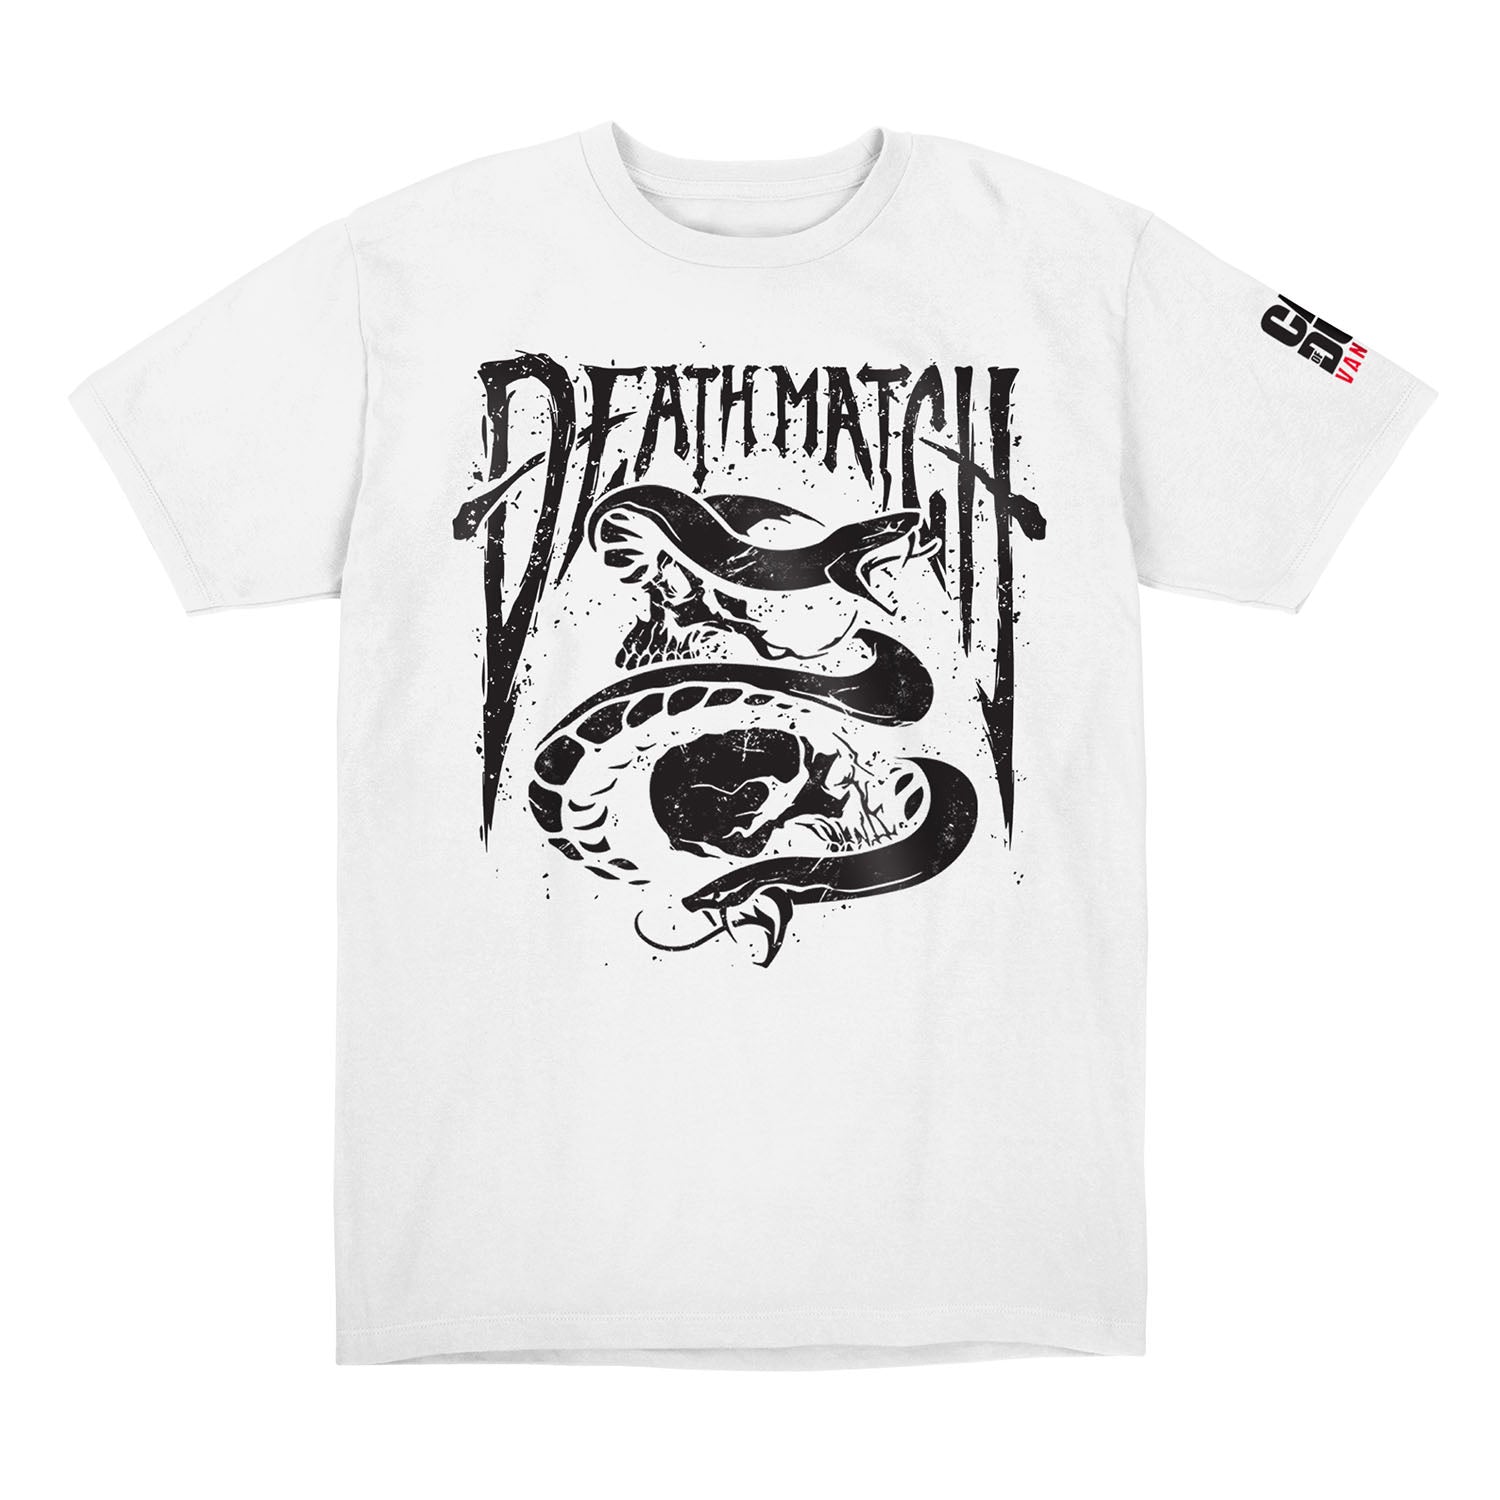 Call of Duty Vanguard White Deathmatch T-Shirt - Front View